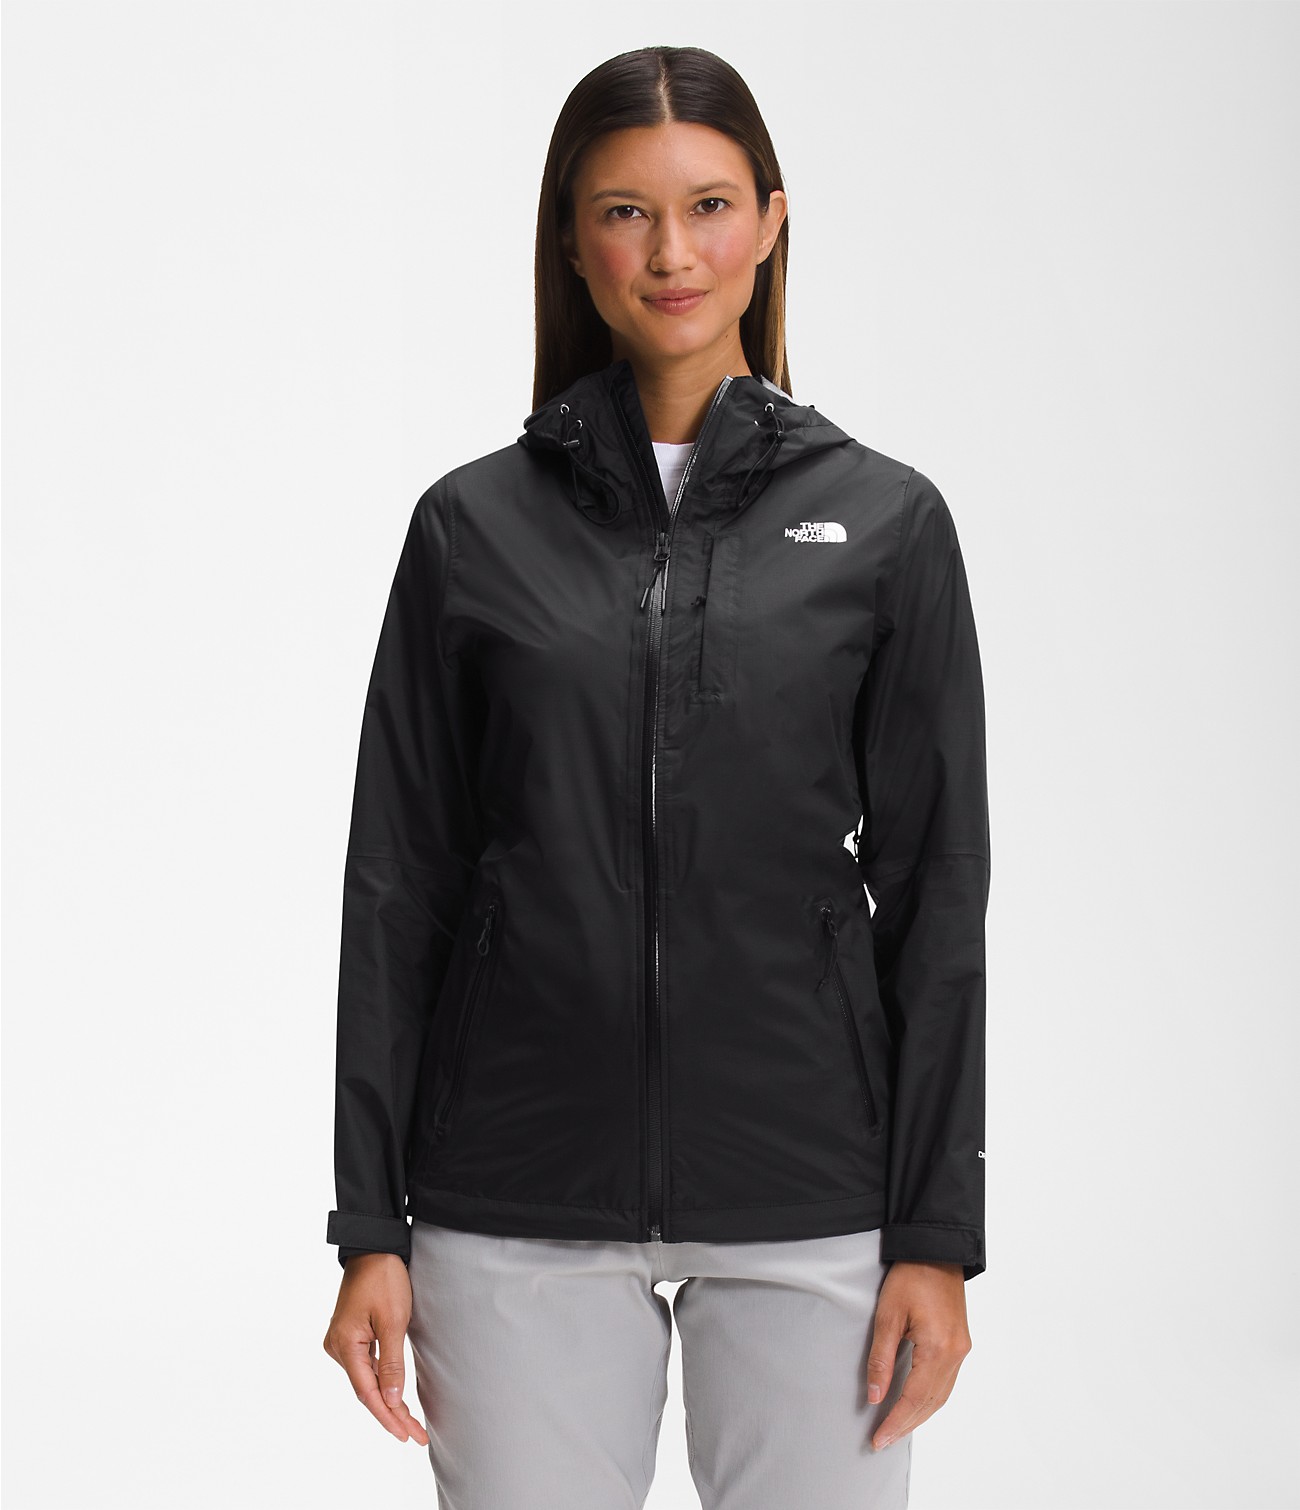 Unlock Wilderness' choice in the North Face Vs Quecha comparison, the Alta Vista Jacket by The North Face